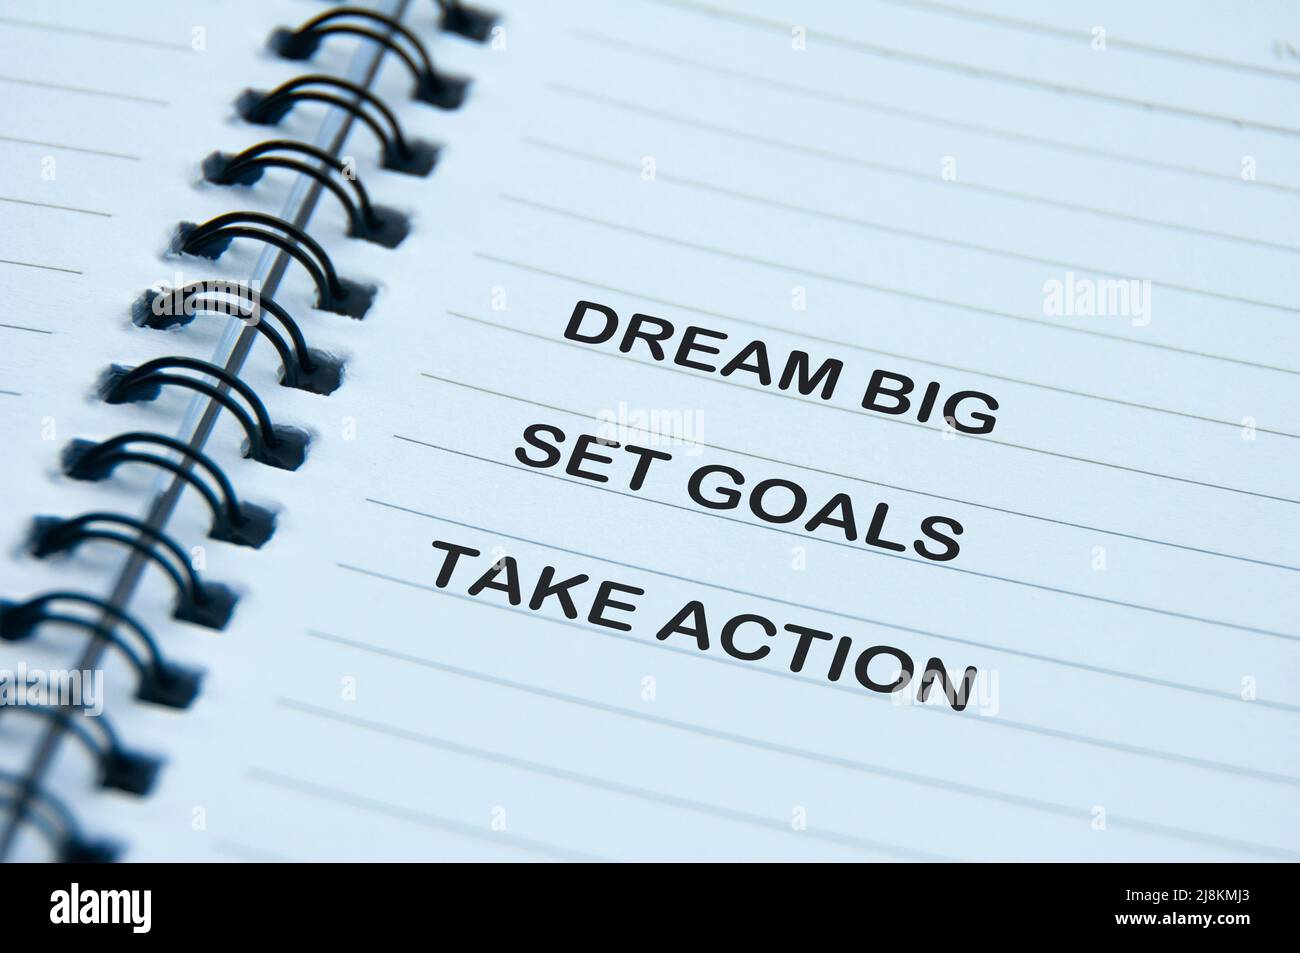 Motivational and inspirational quotes text on notepad - Dream Big, Set Goals, Take Action Stock Photo